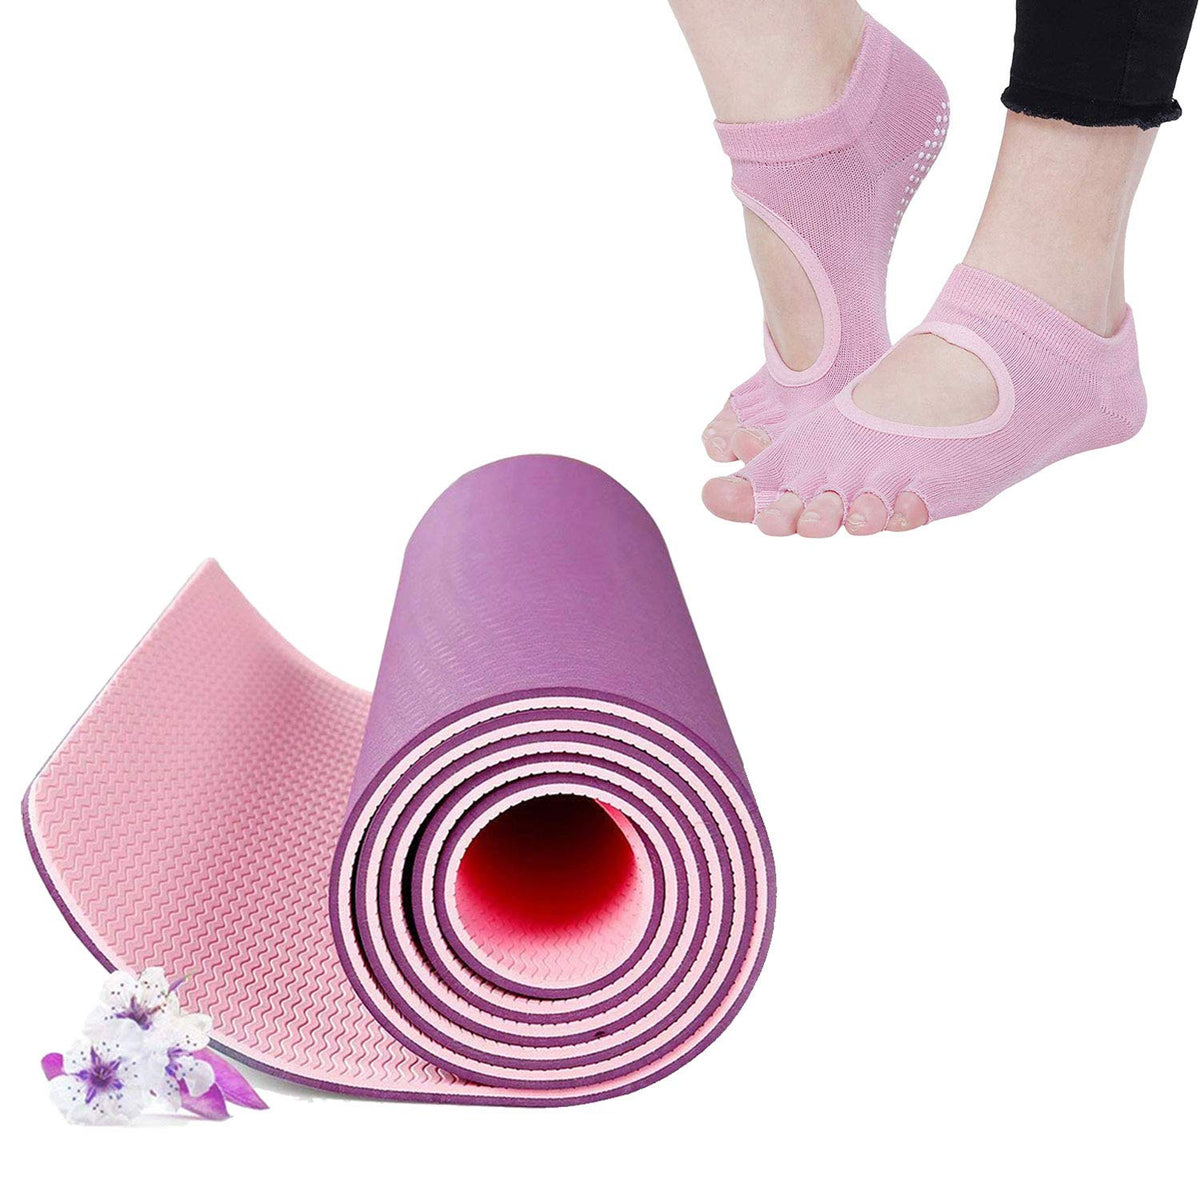 Strauss TPE Eco Friendly Dual Layer Yoga Mat, 6 mm (Pink) and Yoga Socks, Pink